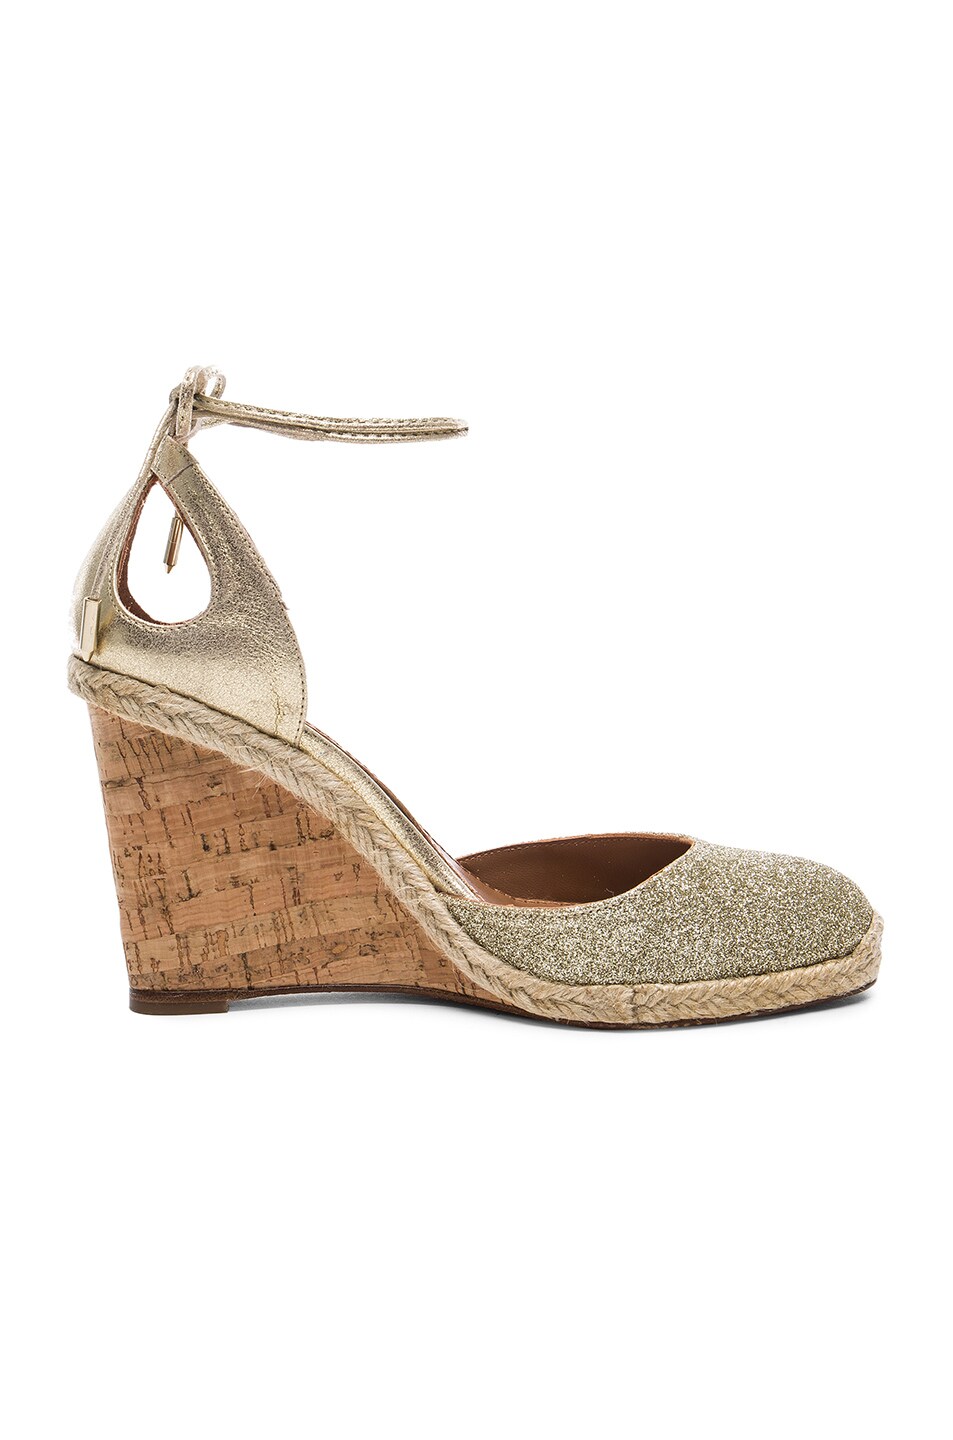 Image 1 of Aquazzura Leather Palm Beach Espadrille Wedges in Light Gold